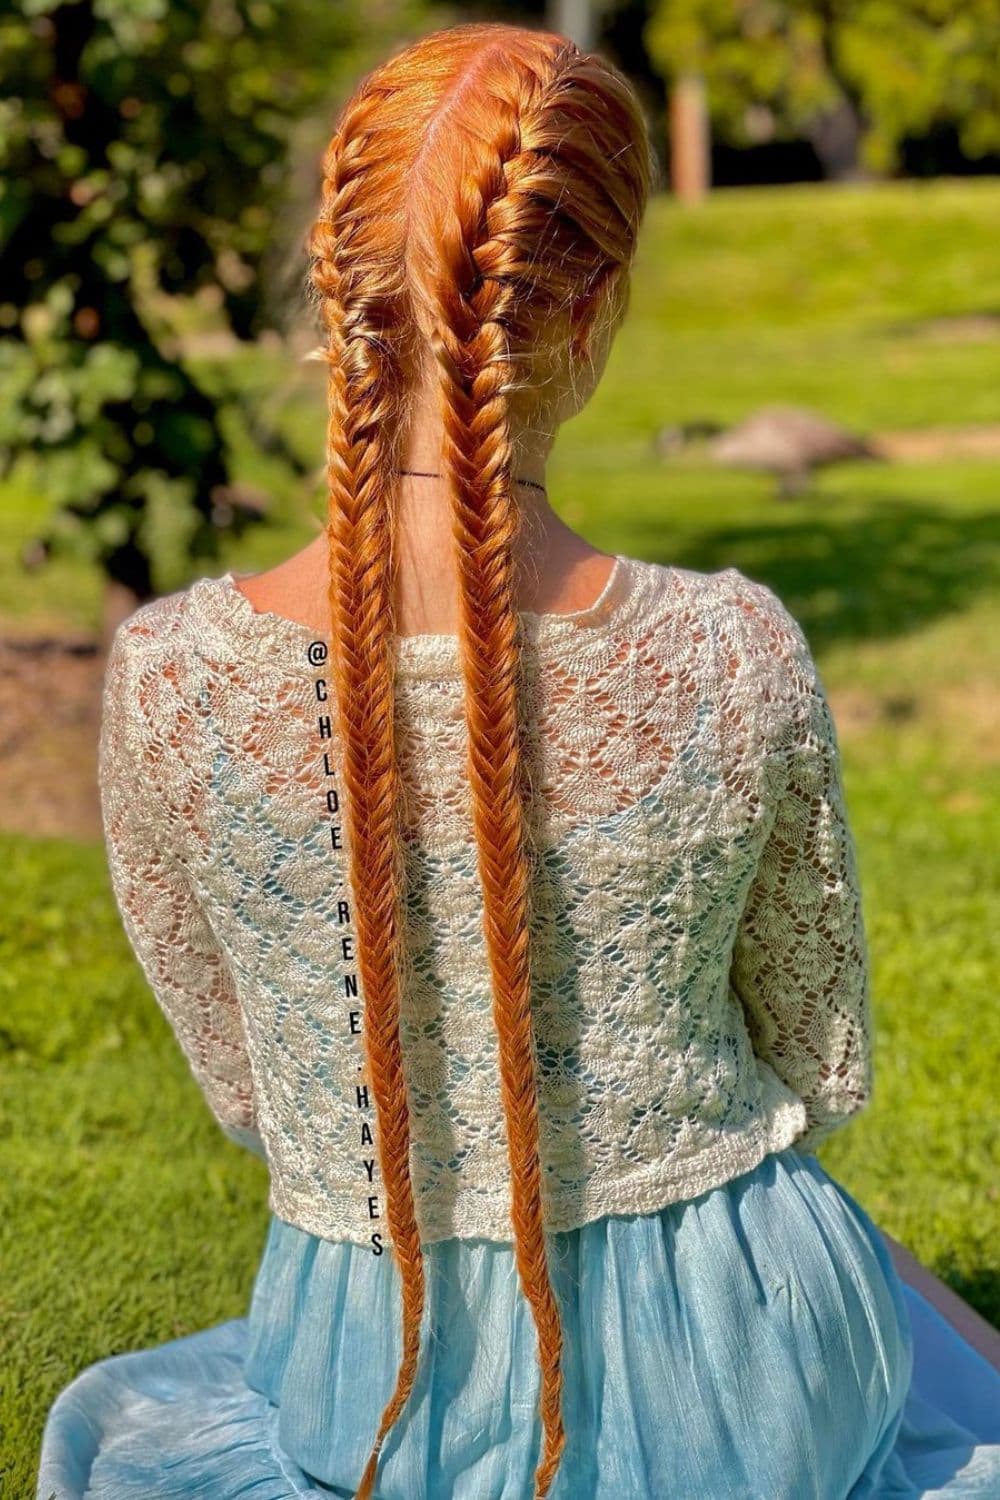 A red-haired woman with double fishtail braids hairstyle.